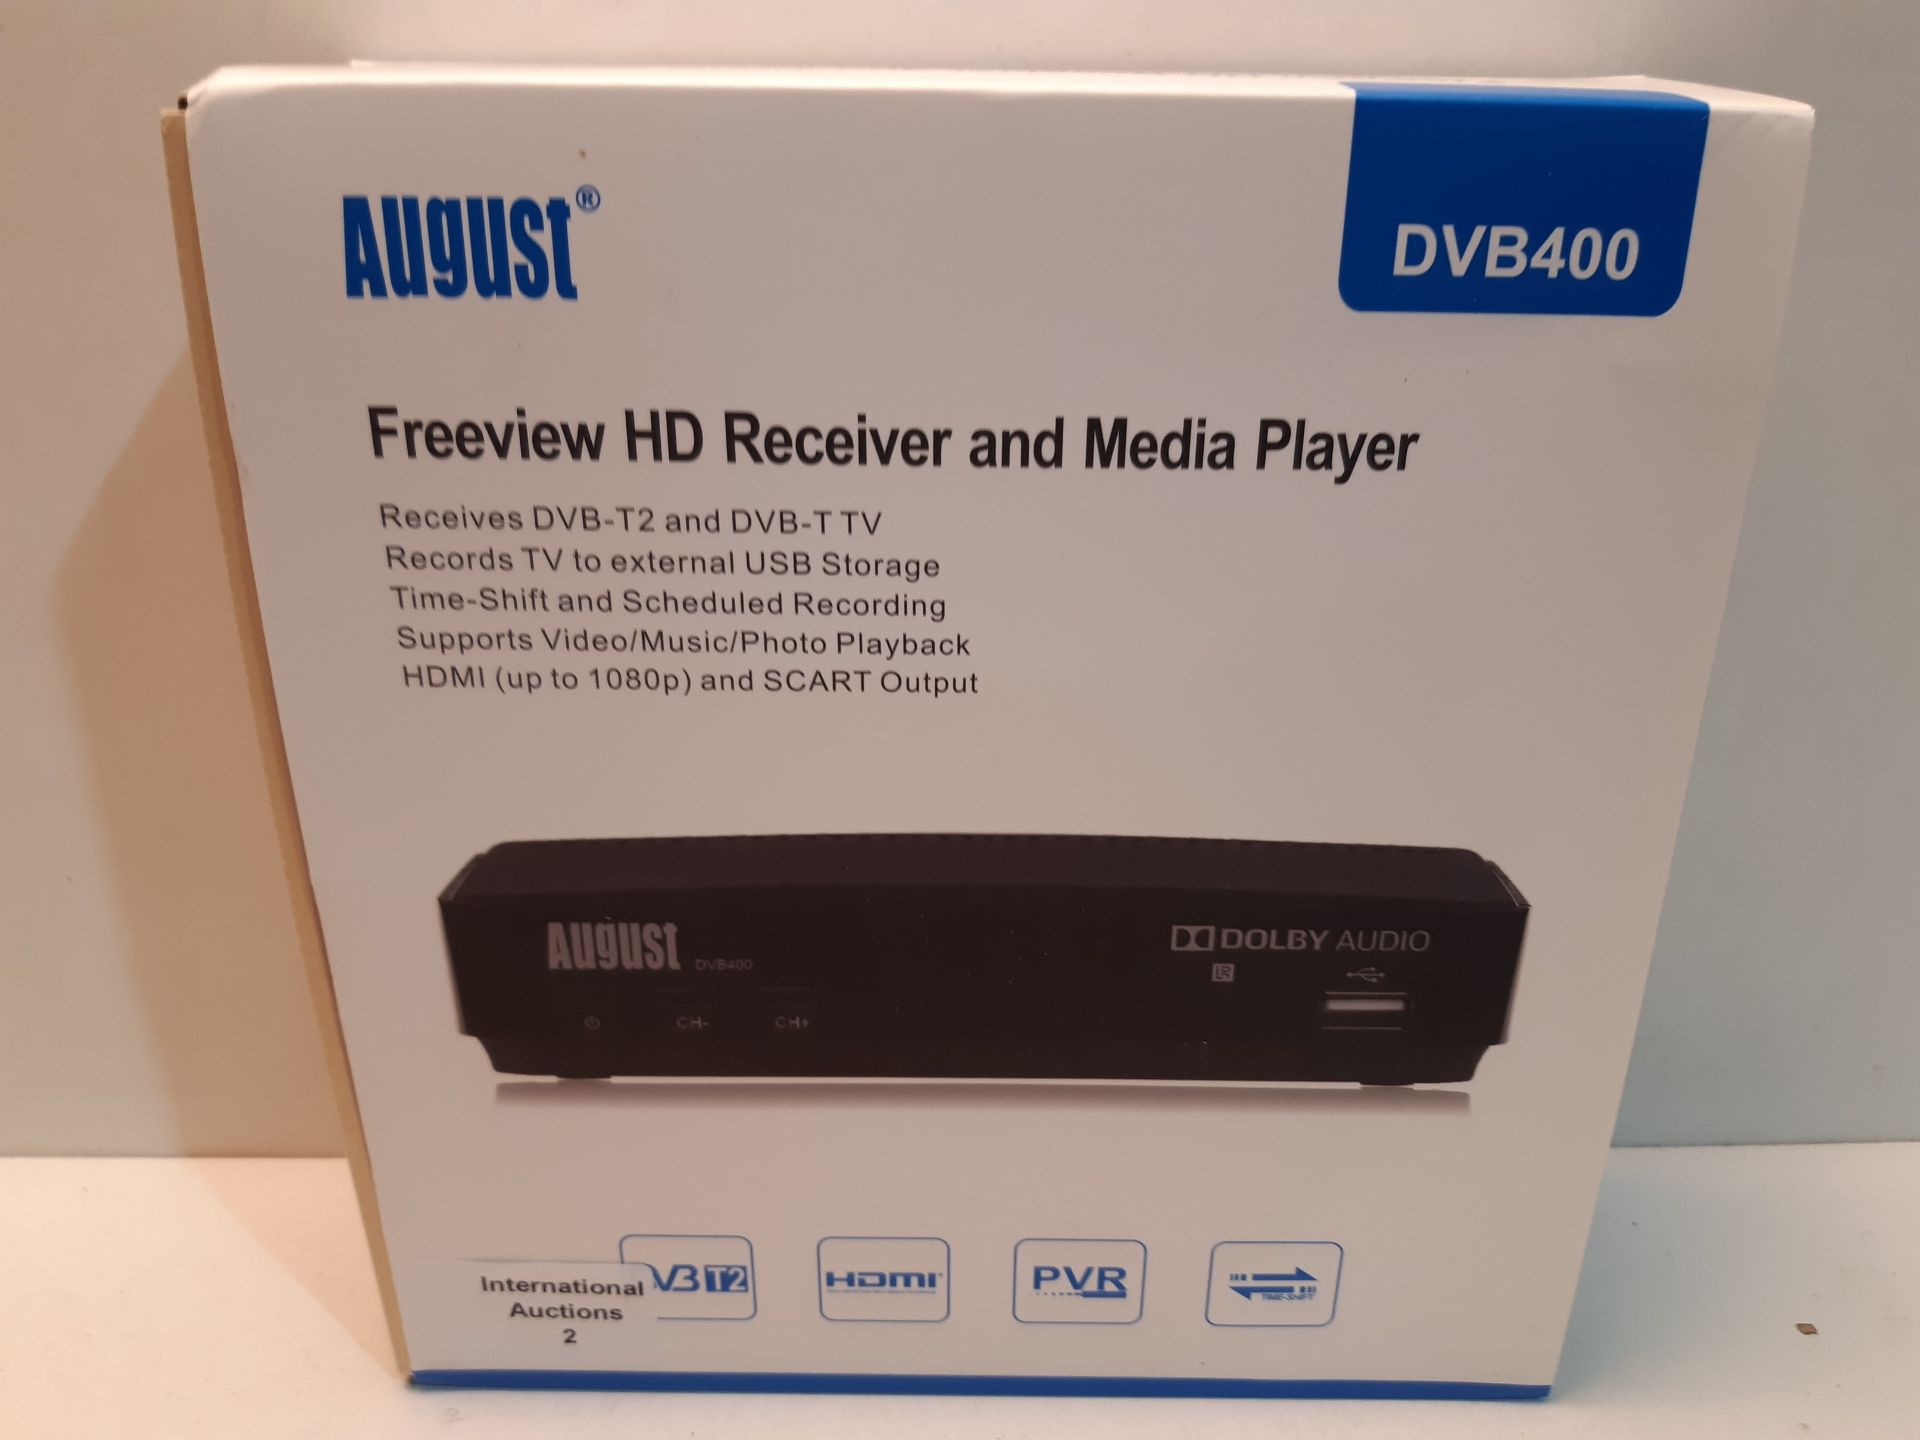 RRP £29.56 HD Freeview Set Top Box August DVB400 - Watch - Image 2 of 2